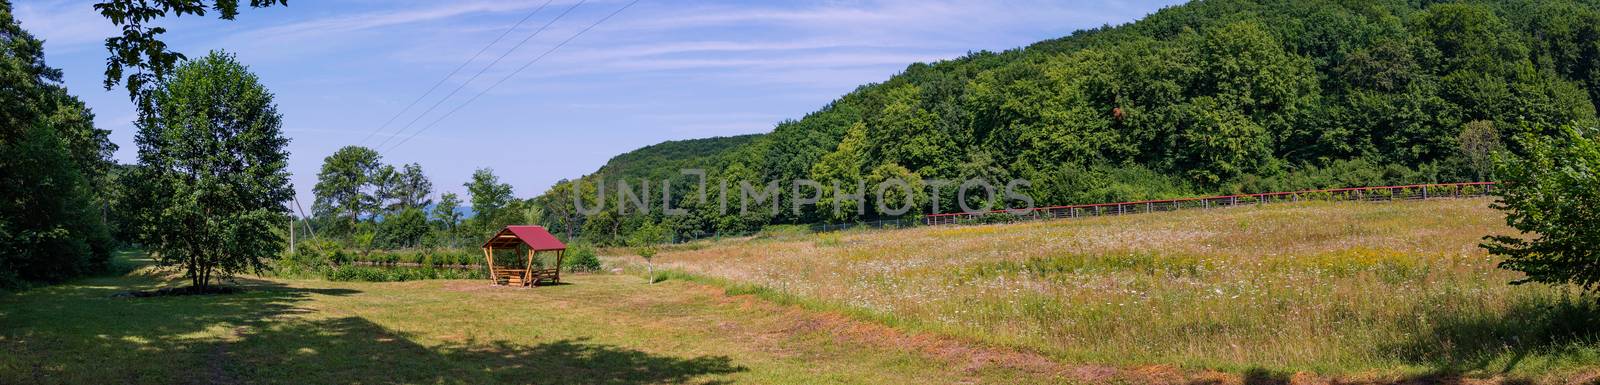 A panorama of meadow with a gazebo on the background of green wooded mountains on a clear day by Adamchuk